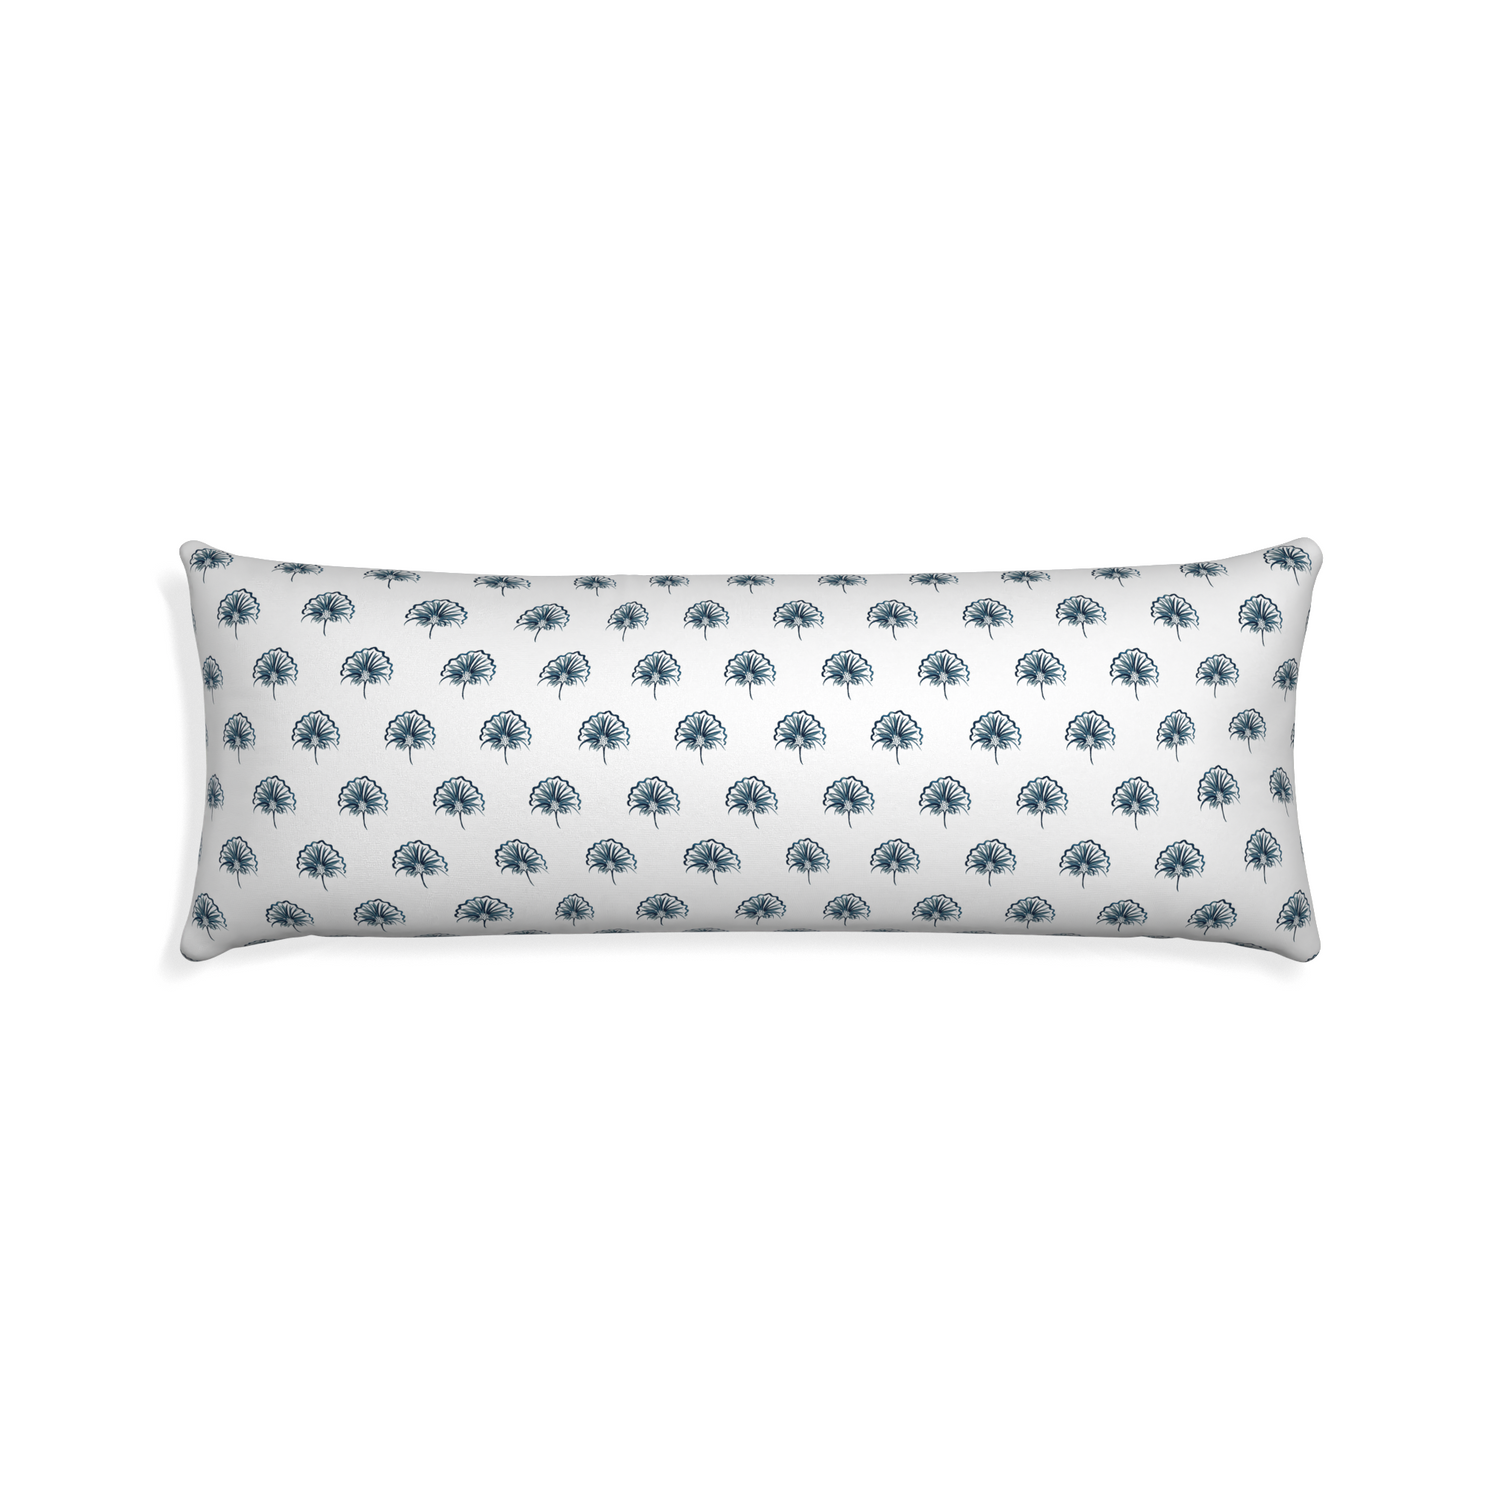 Xl-lumbar penelope midnight custom pillow with none on white background